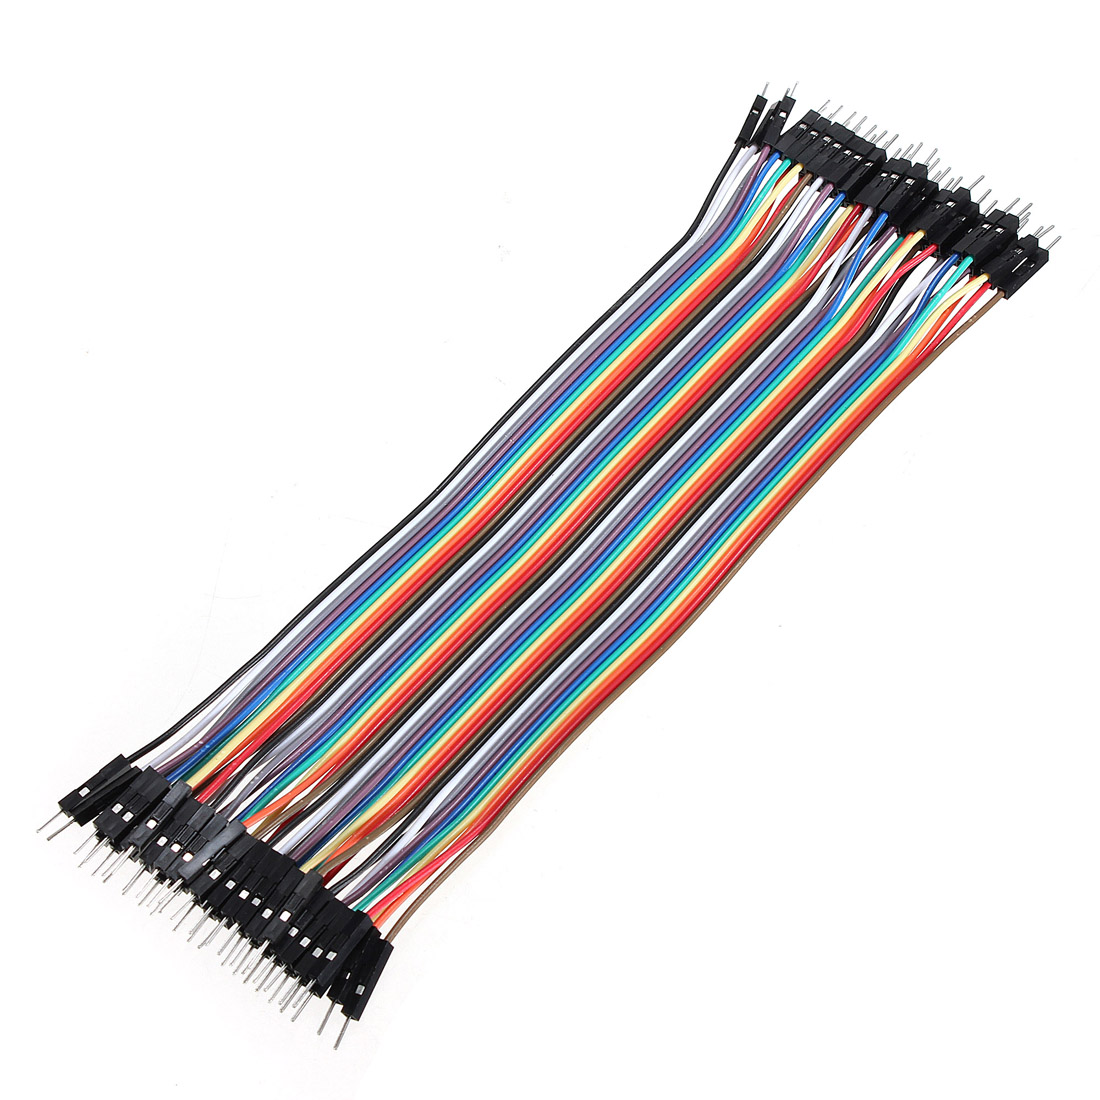 Other Components - 40pcs 20cm Male To Male Color Breadboard Cable ...